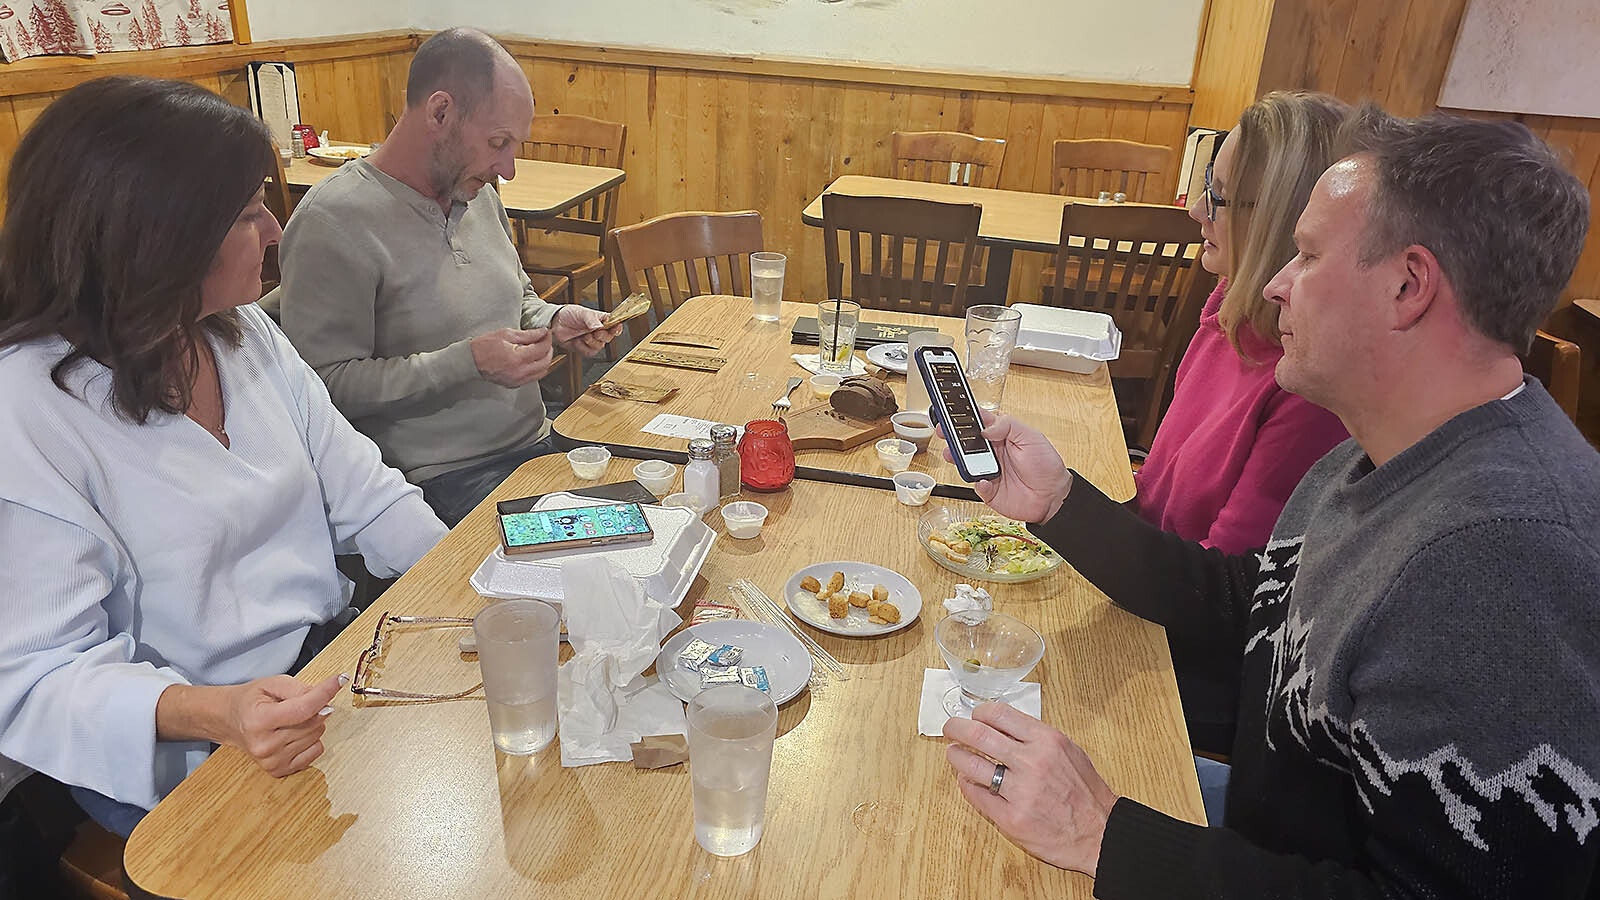 Laura Hoch, from left, watches as her husband Chris sorts through their goldbacks while across the table, Caroline Walter watches and her husband, Dan Walter, checks exchange rates using the Goldback Company's app.